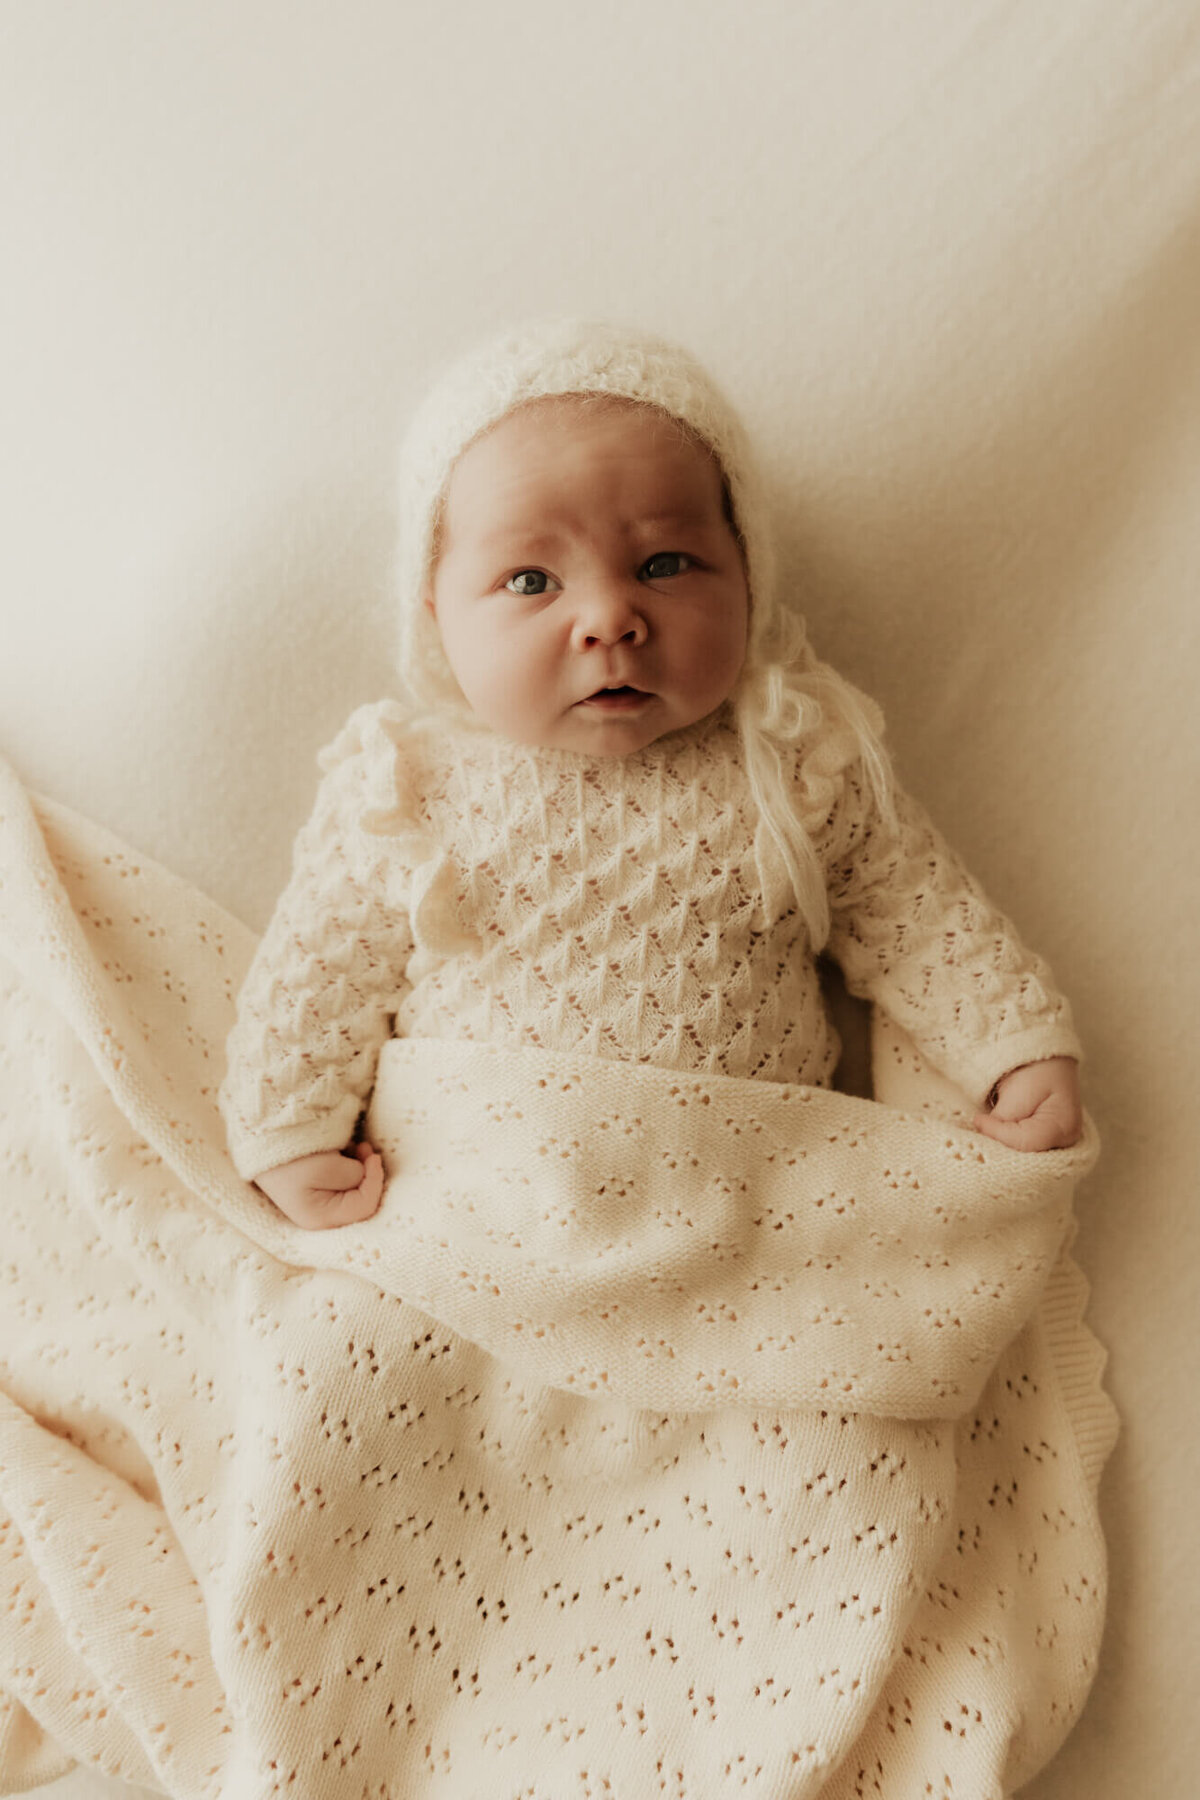 Newborn baby girl looks lies on a beanbag wearing a cream romper and bonnet while wrapped in  blanket.